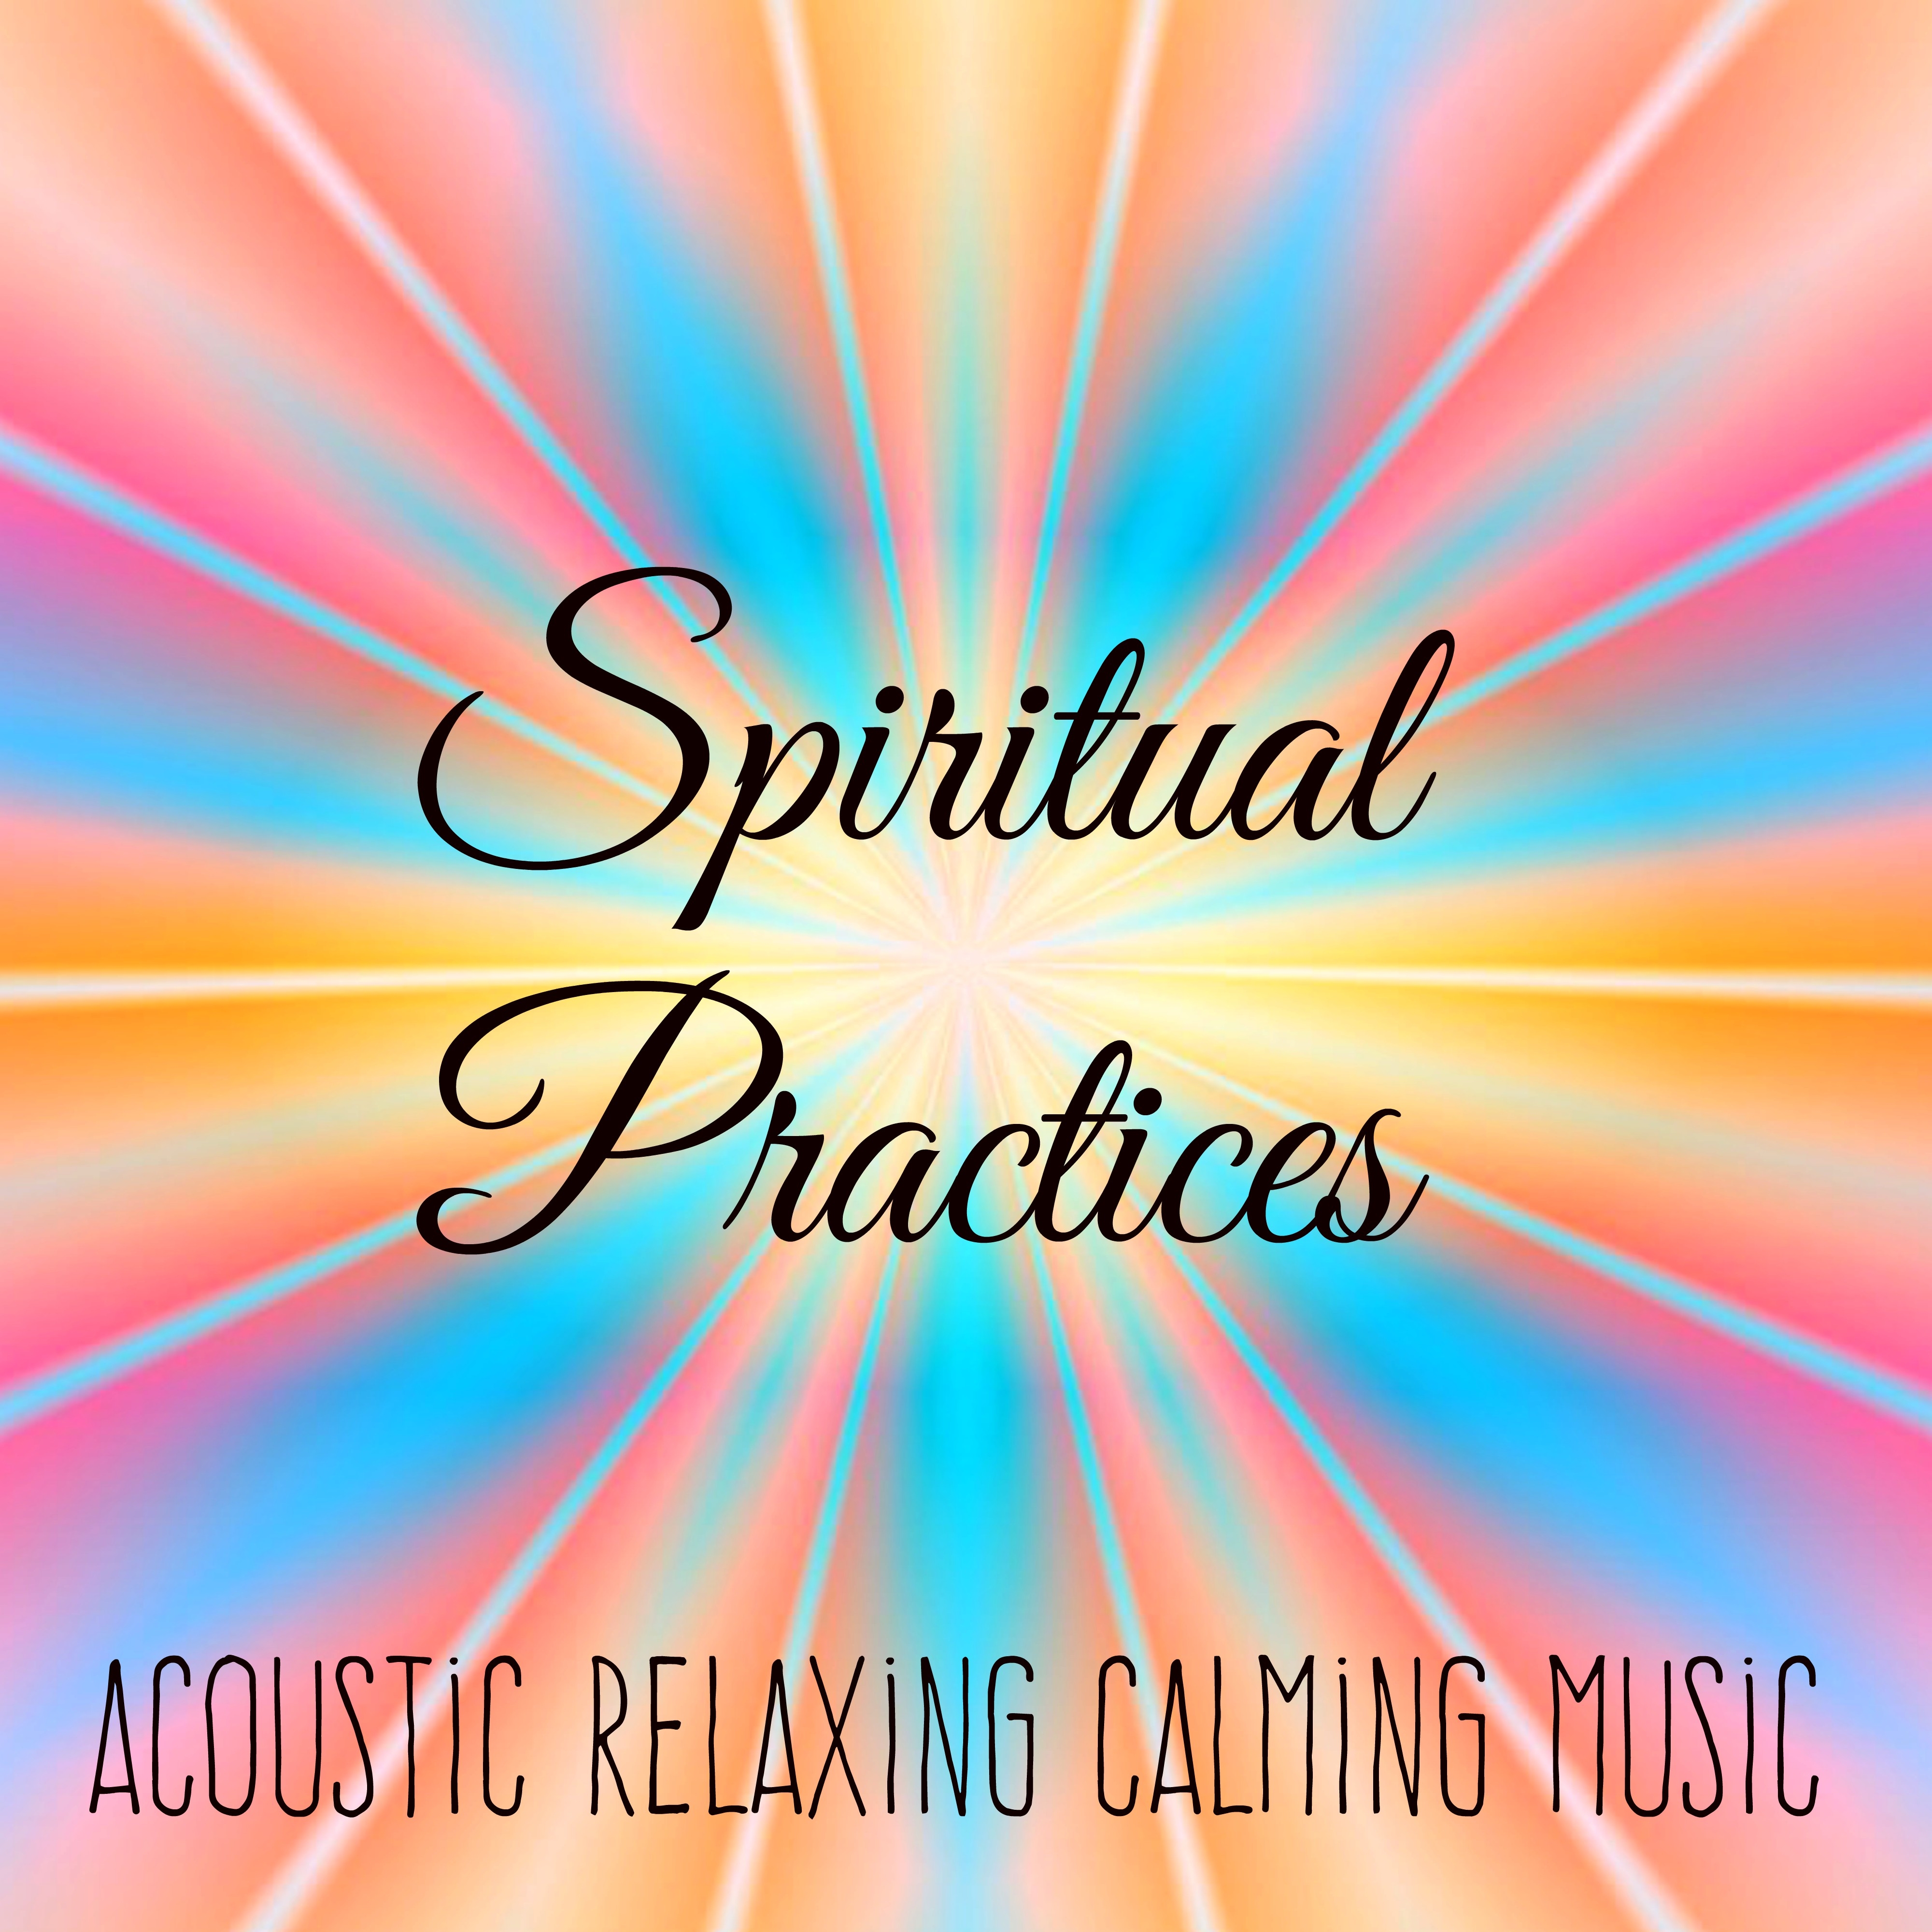 Spiritual Practices - Acoustic Relaxing Calming Music for Serenity Day Spa Feeling Great and Brain Stimulation